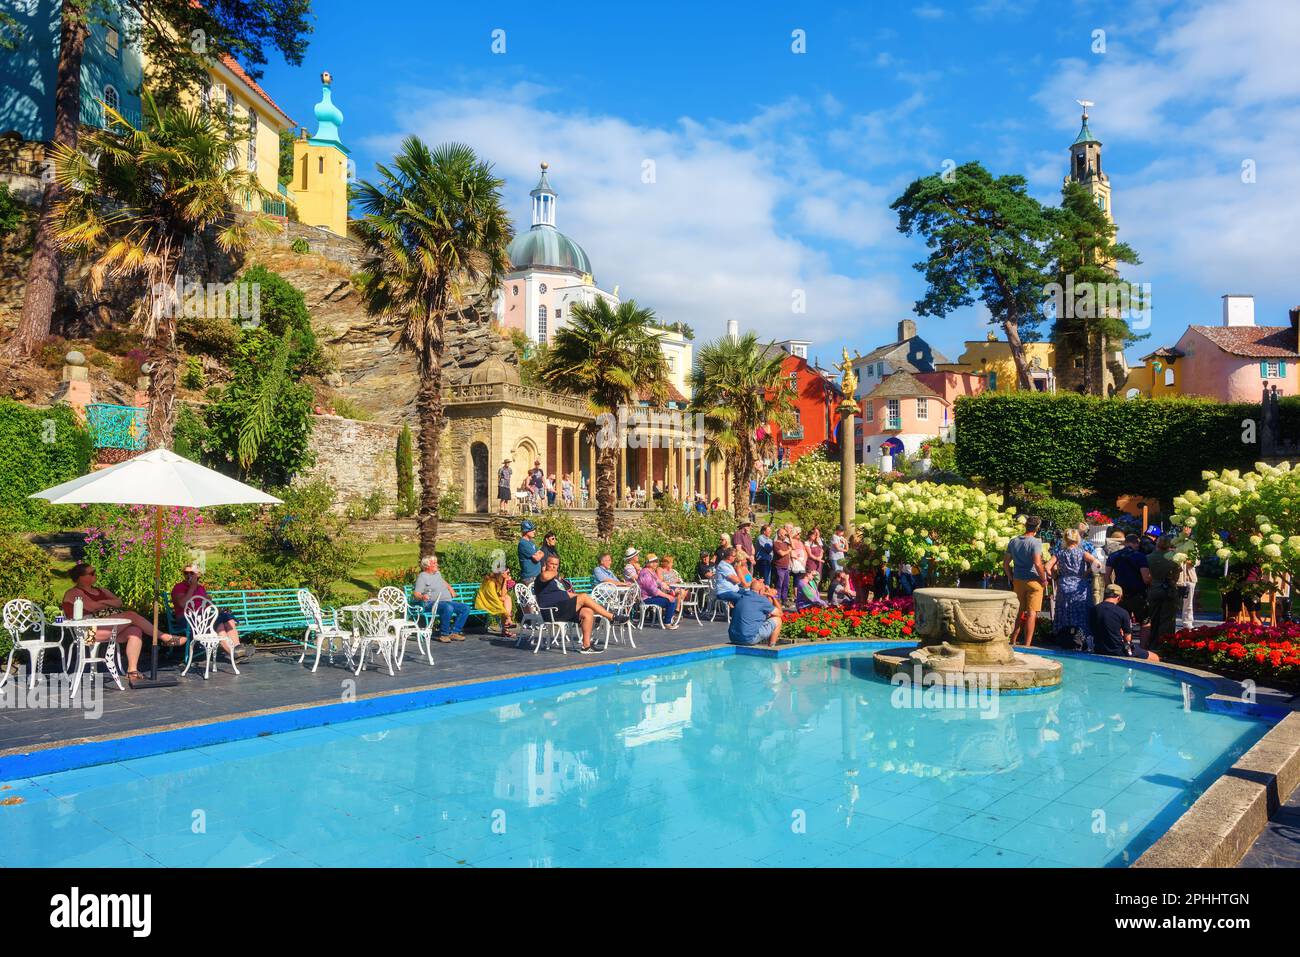 Portmeirion, Wales - 20 July 2022: Picturesque Portmeirion village is a popular tourist destination and film set location in North Wales, United Kingd Stock Photo